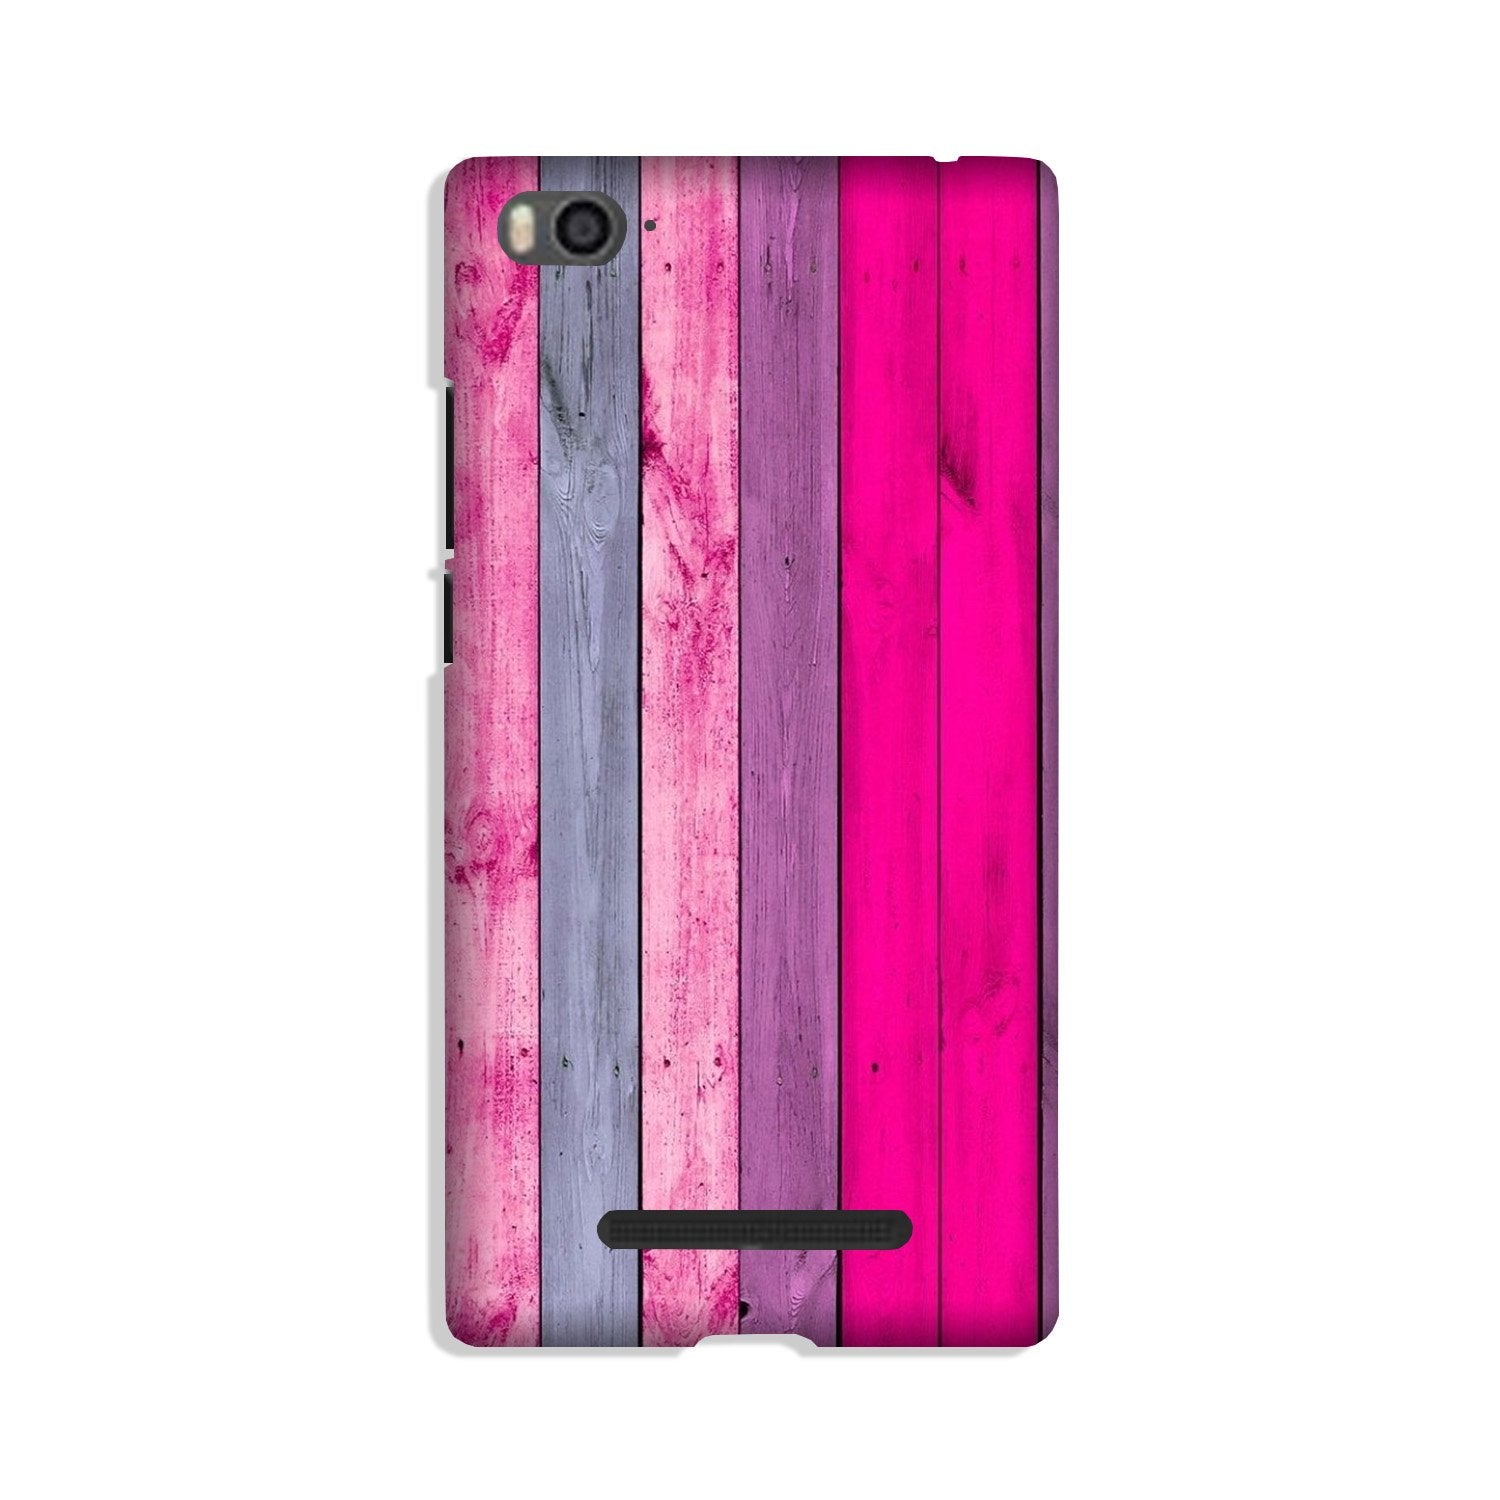 Wooden look Case for Redmi 4A